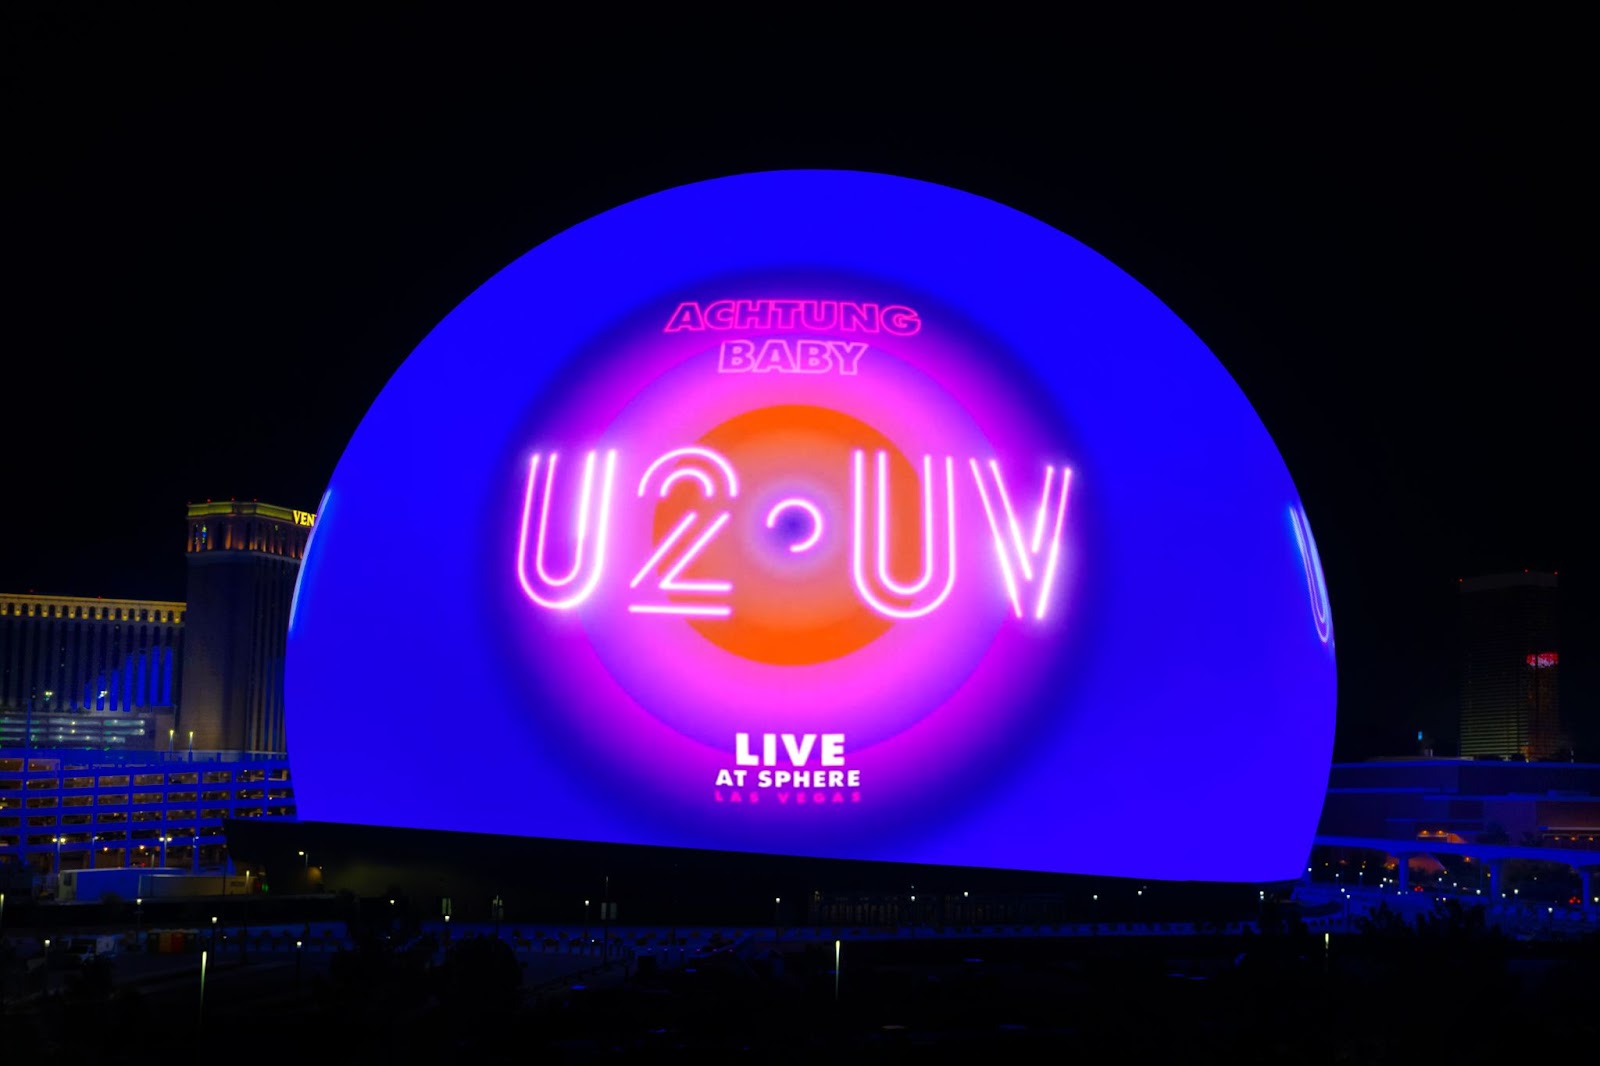 U2 @ Sphere: Intersection of Liberal Arts & Technology